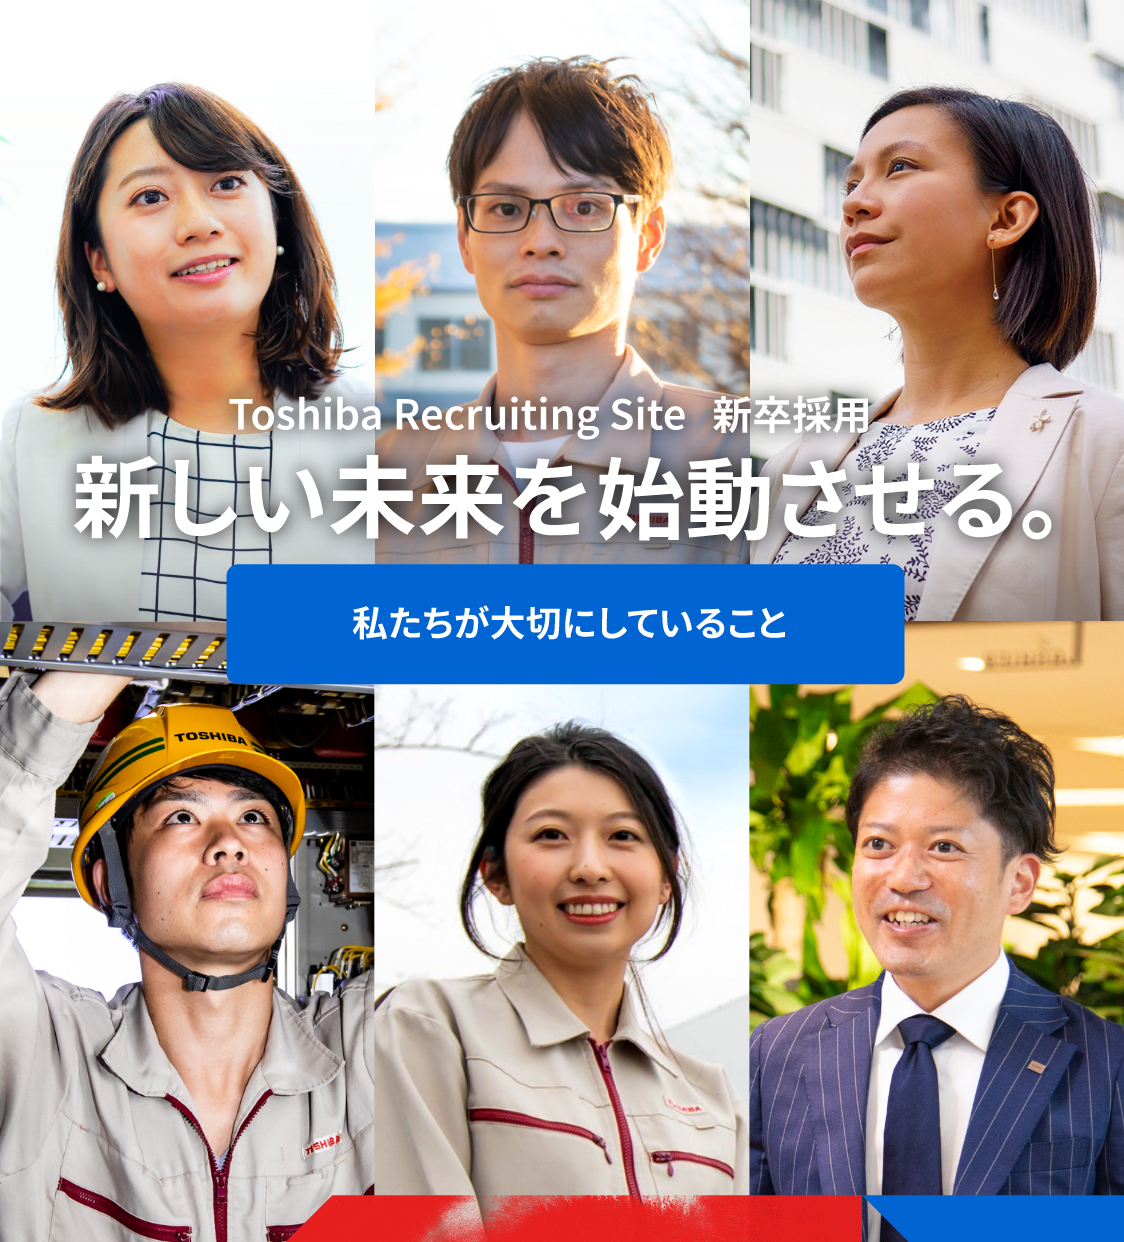 Toshiba Recruting Site 新卒採用　新しい未来を始動させる。